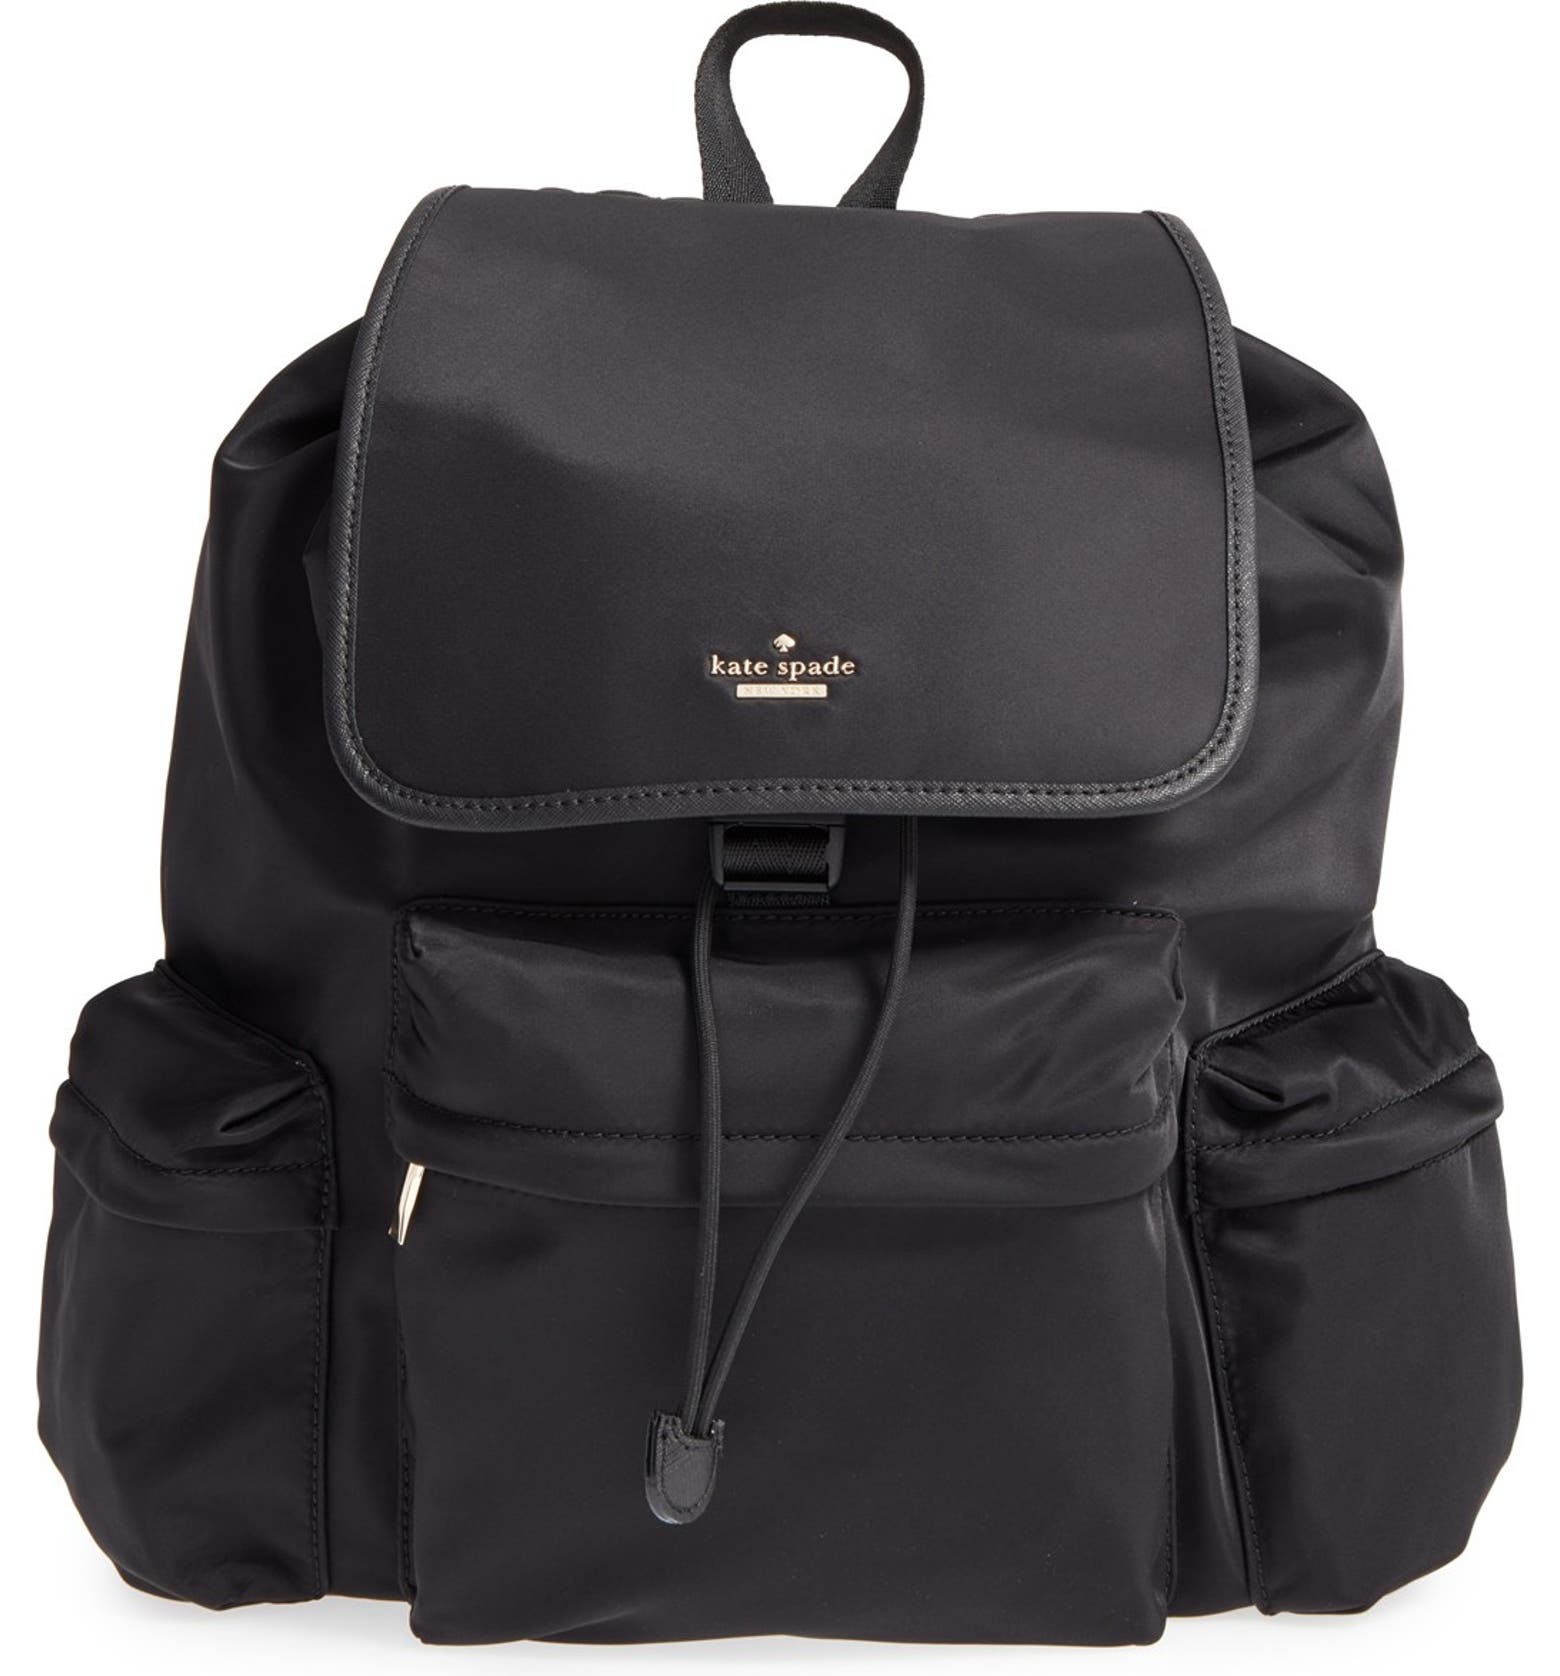 kate spade new york 'classic - clay' nylon backpack | Nordstrom